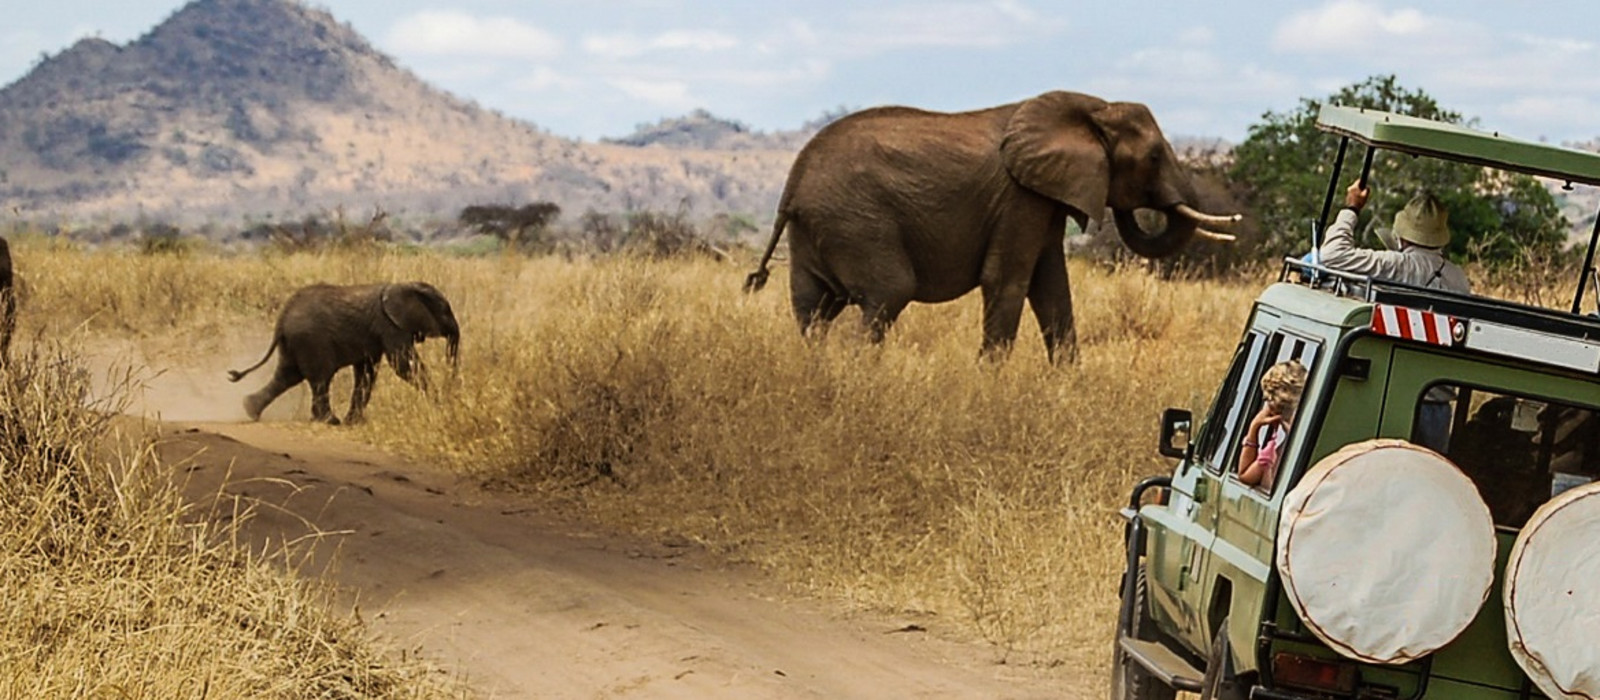 Best Time for Wildlife Safari in Africa | Enchanting Travels